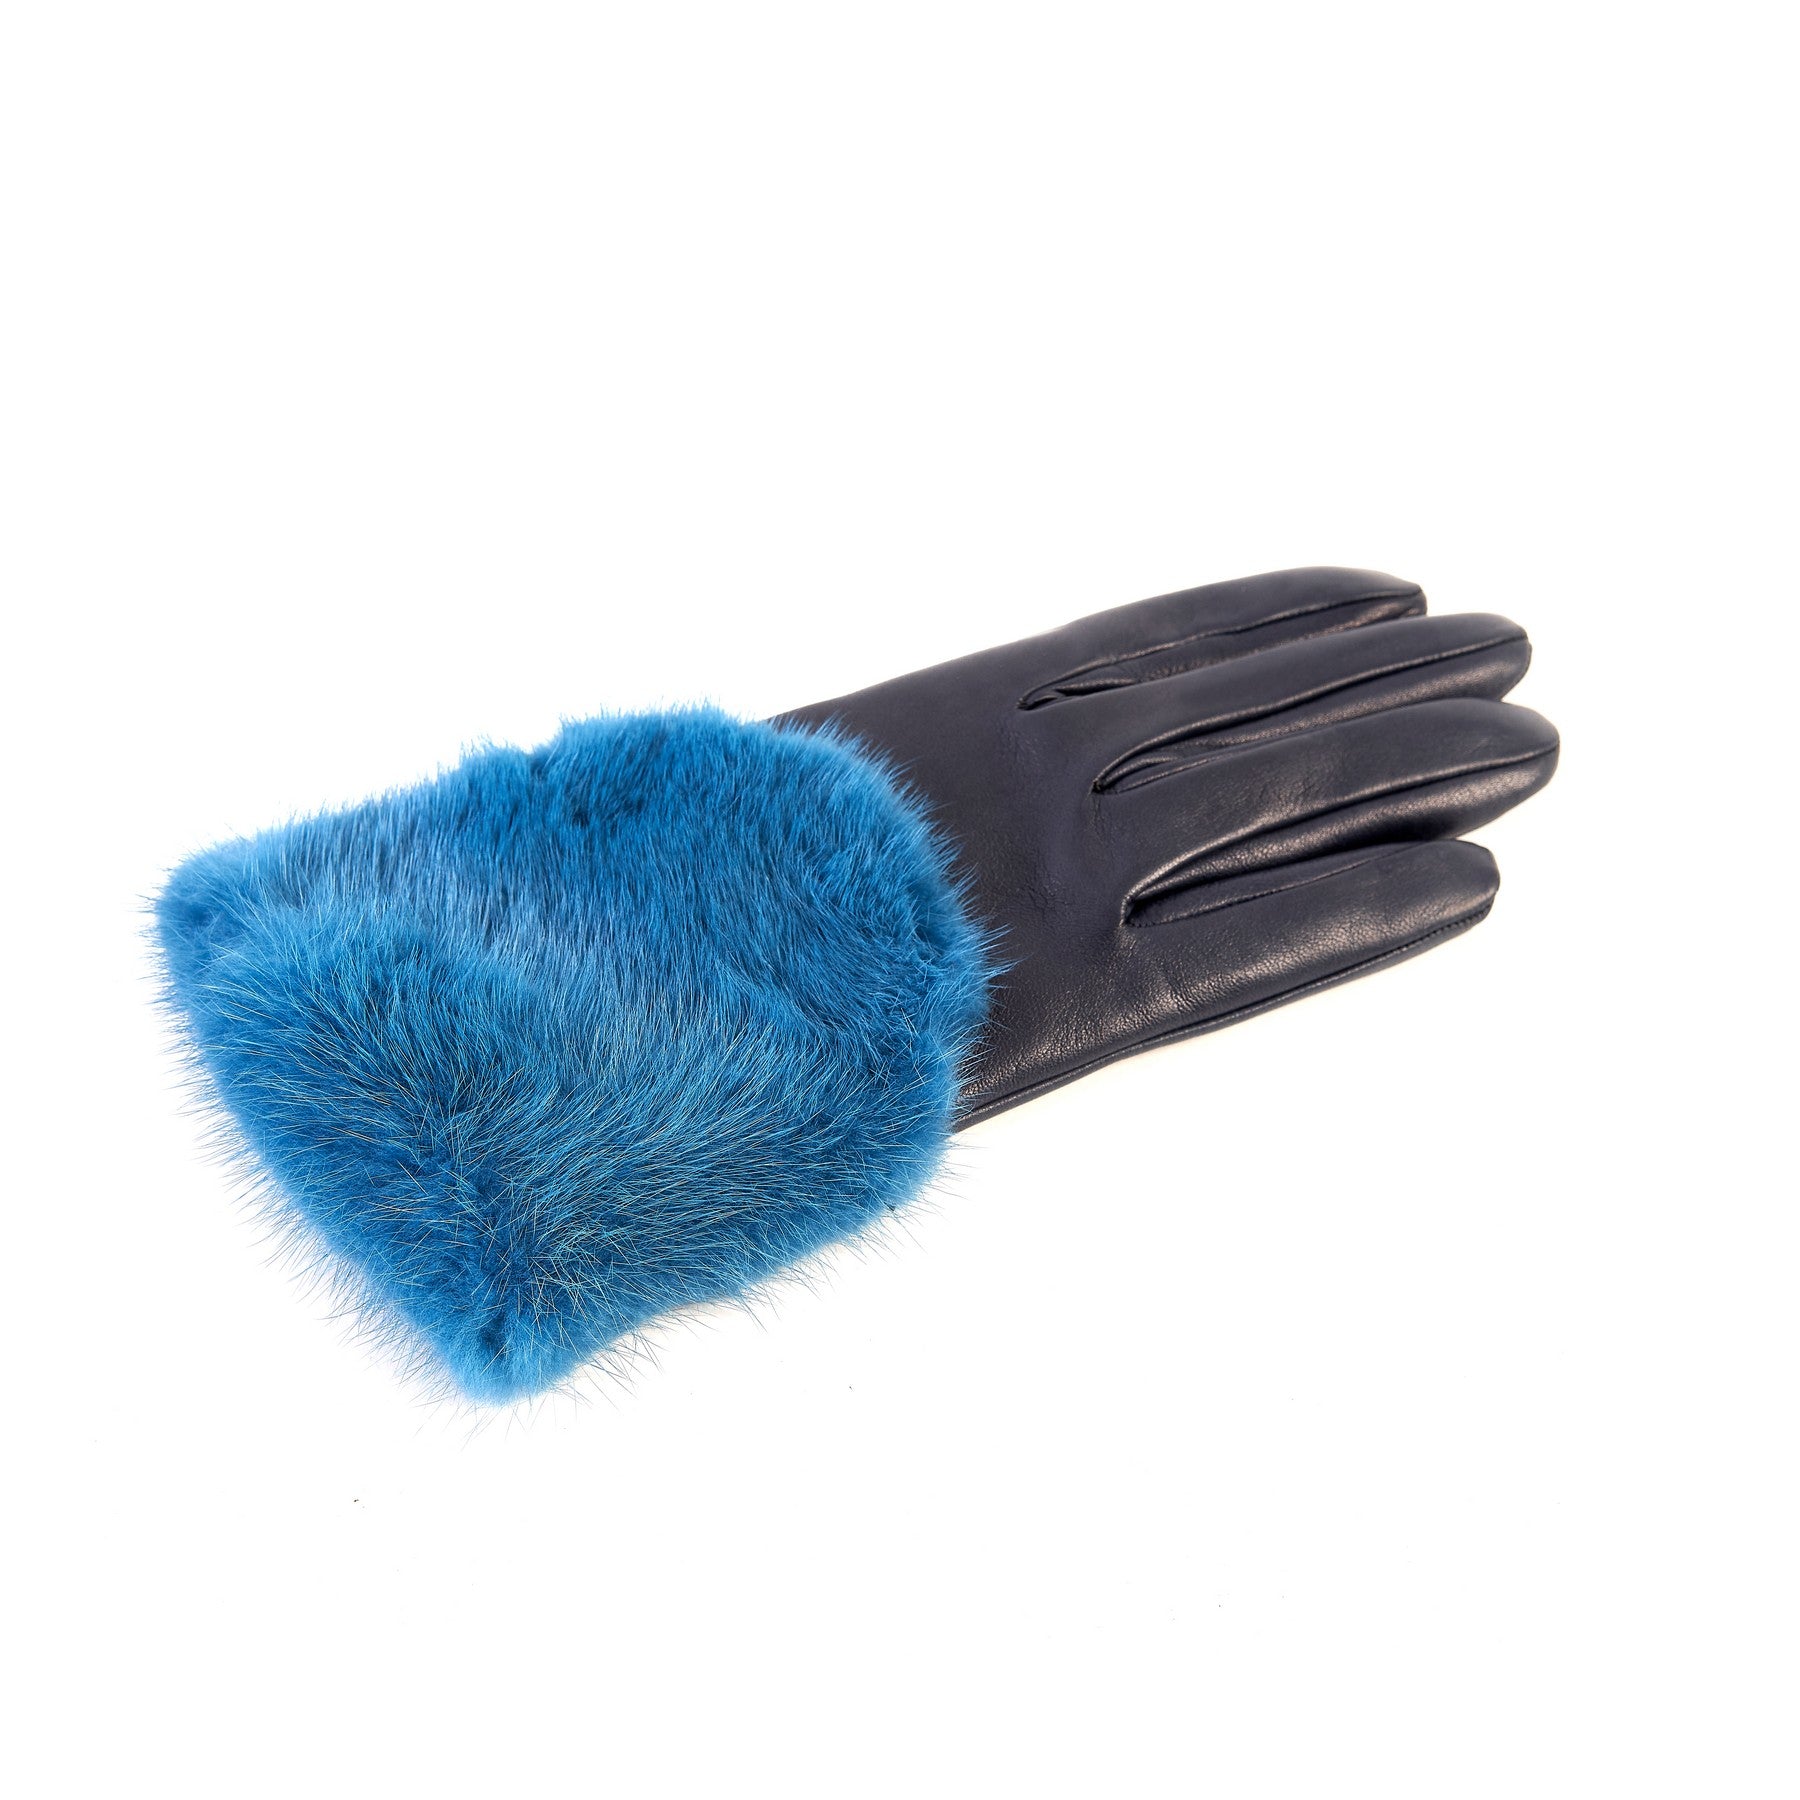 Women's blue marine nappa leather gloves with a wide real fur panel on the top and cashmere lined